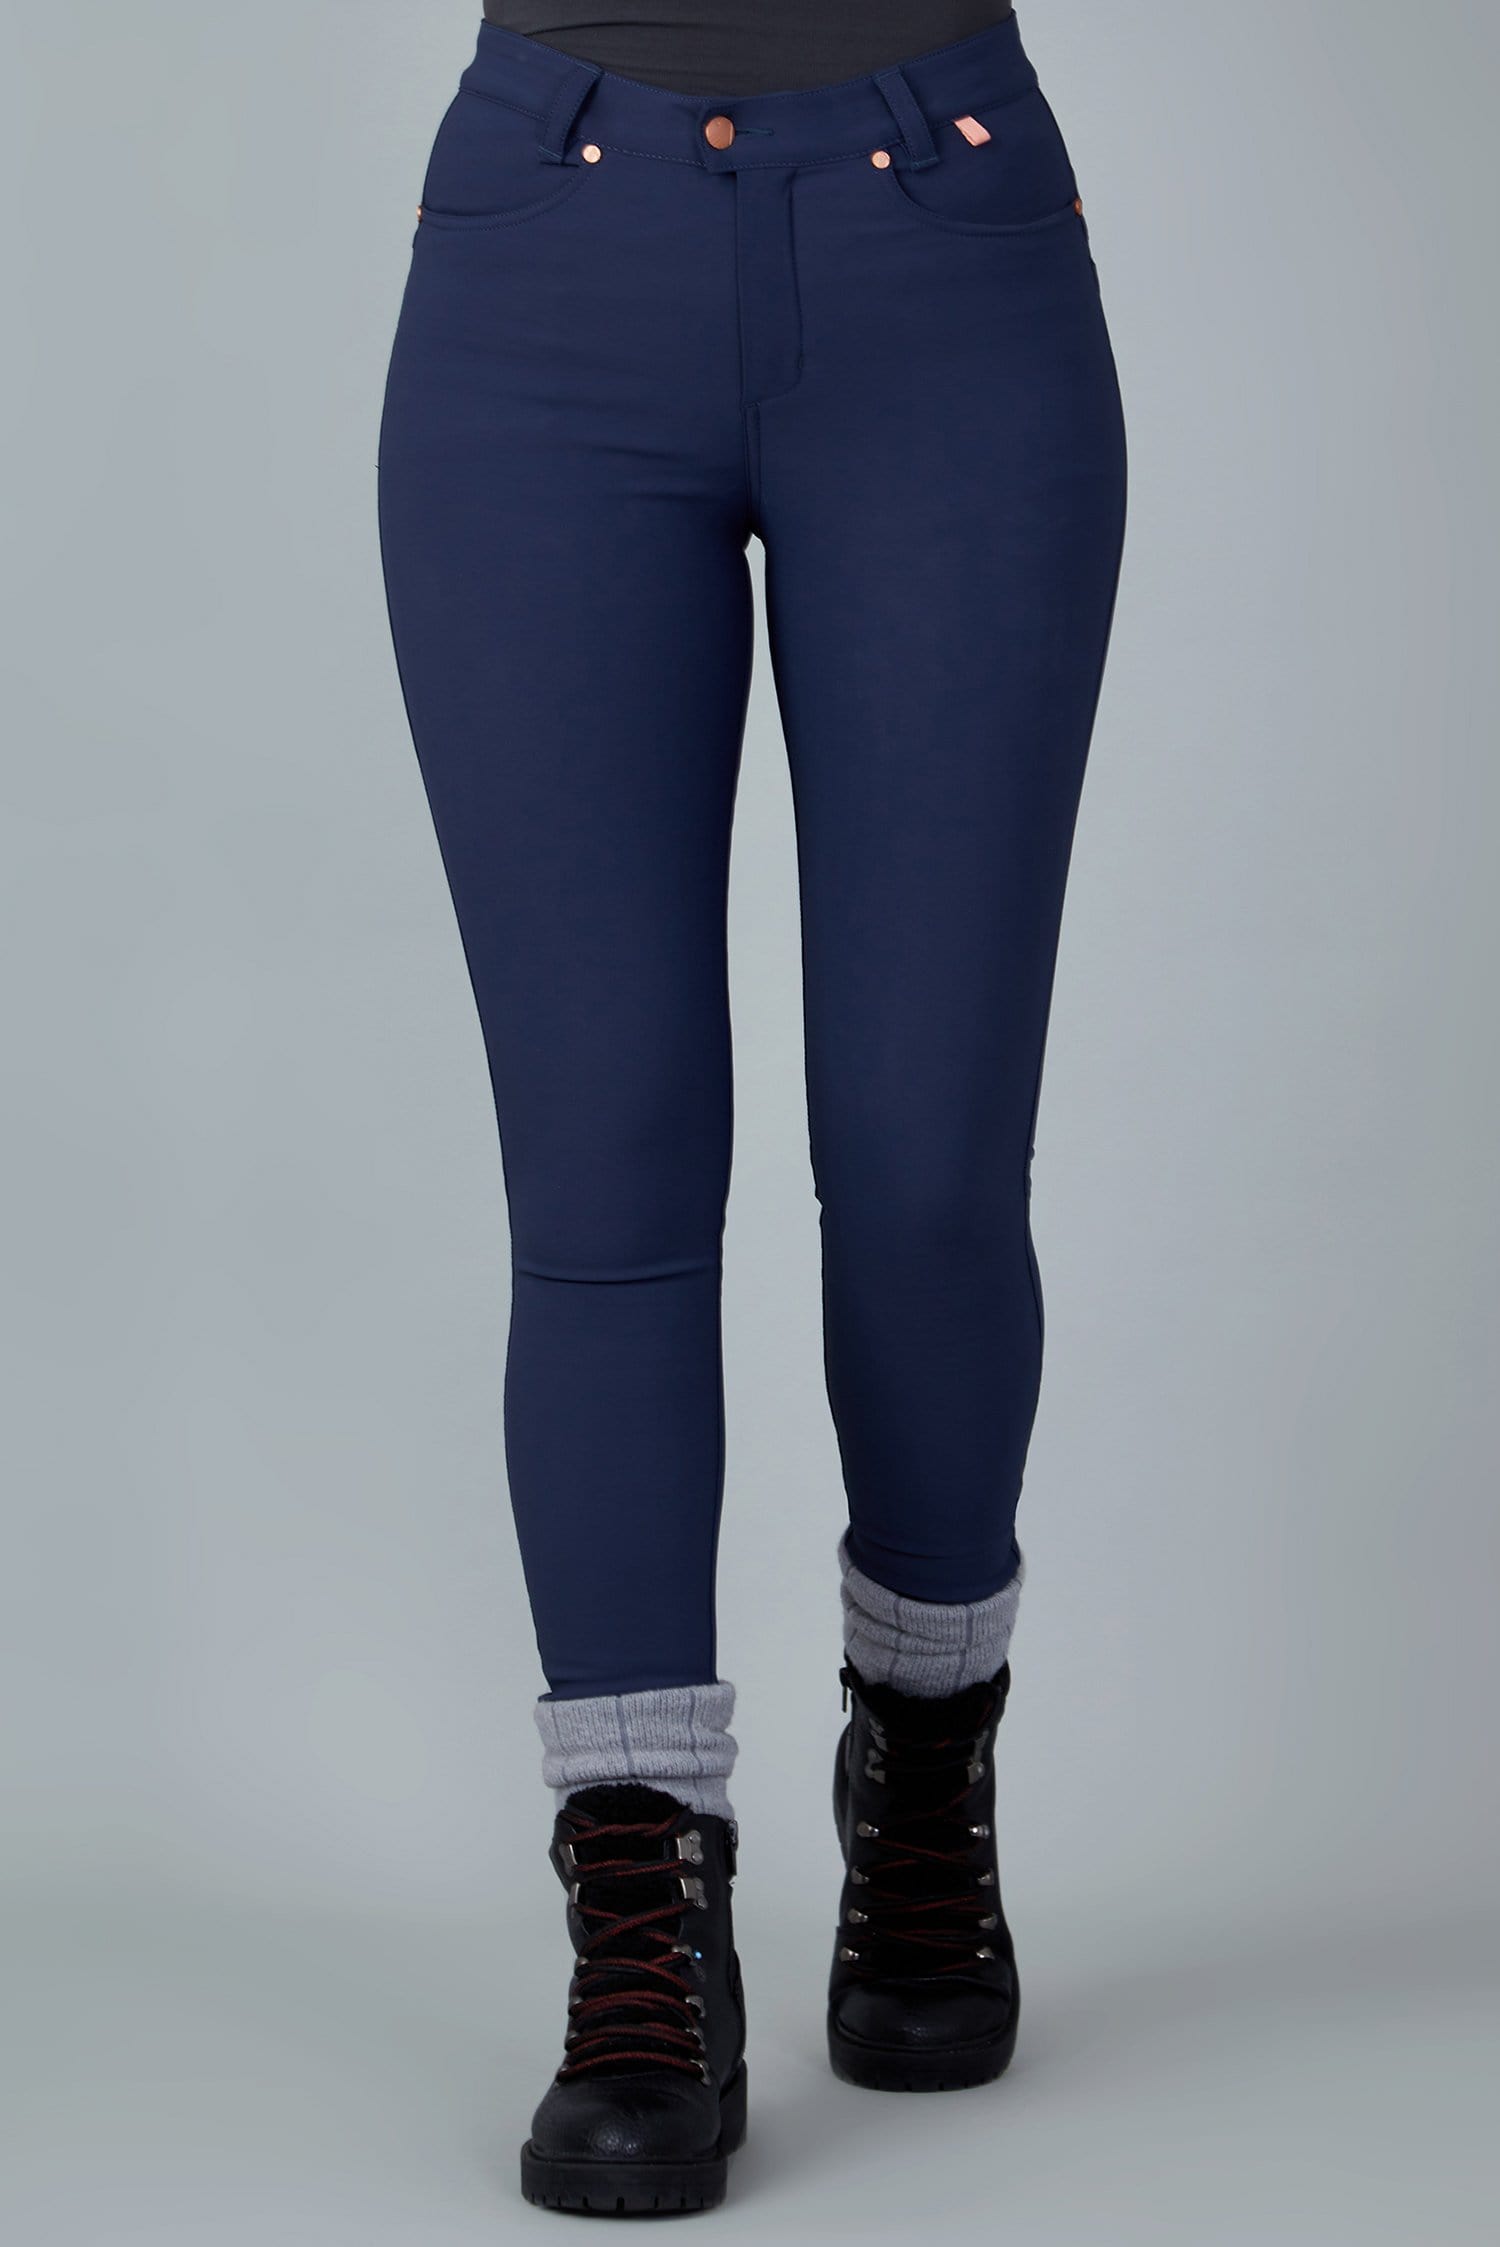 The Aventurite Stretch Skinny Outdoor Trousers - Midnight Blue - 40r / Uk22 - Womens - Acai Outdoorwear